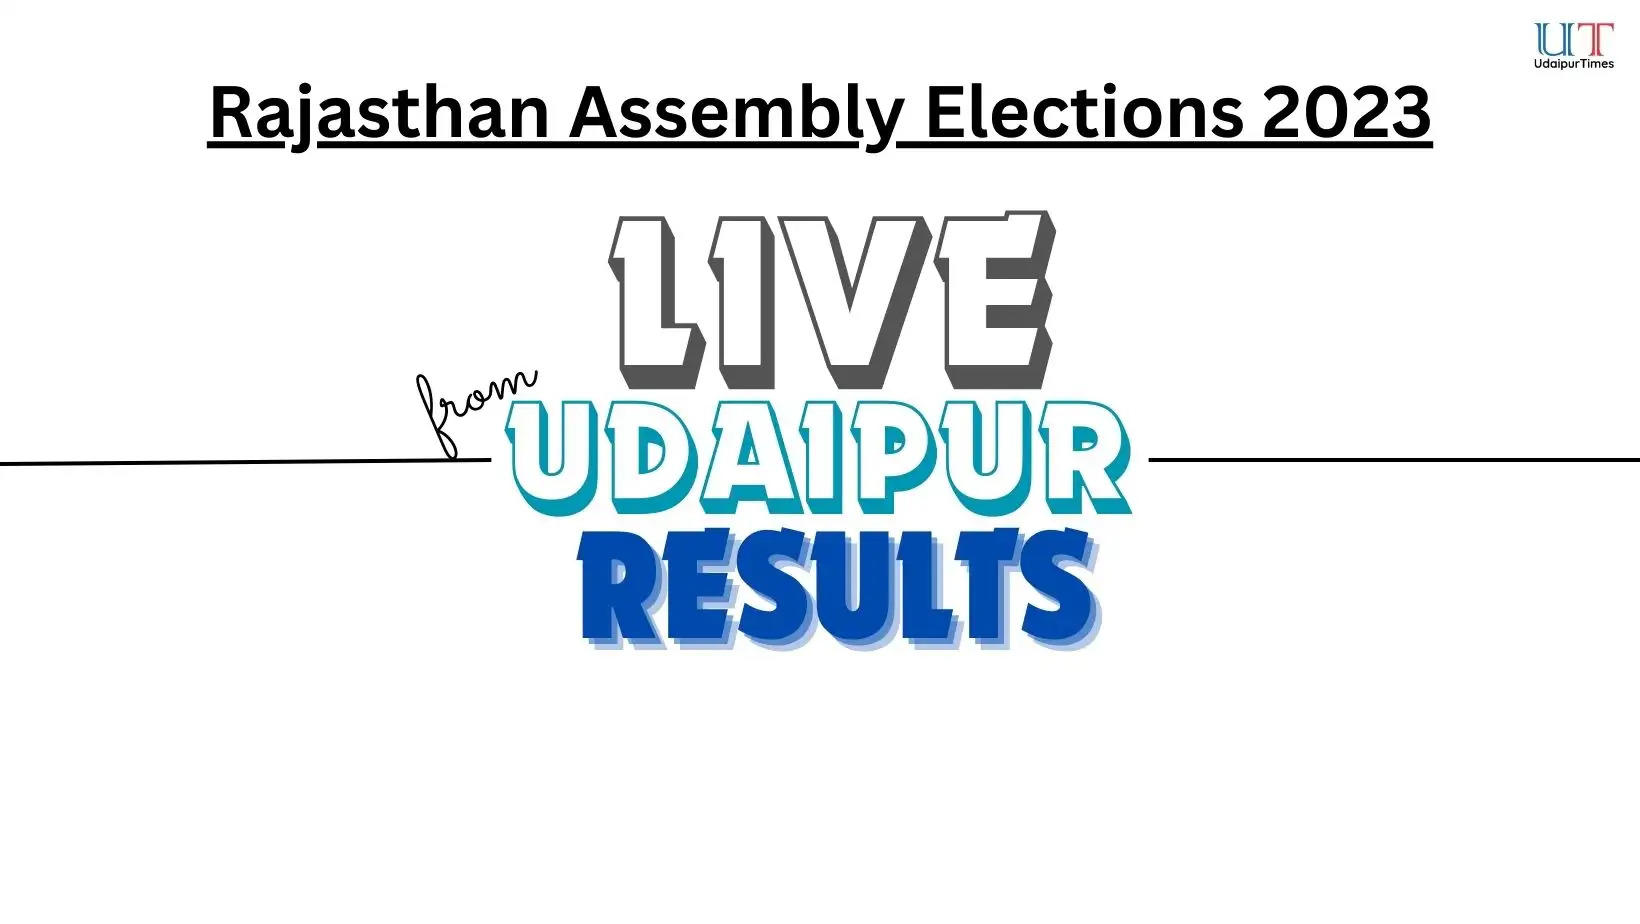 LIVE RESULTS UPDATE FROM UDAIPUR Rajasthan Assembly Elections 2023